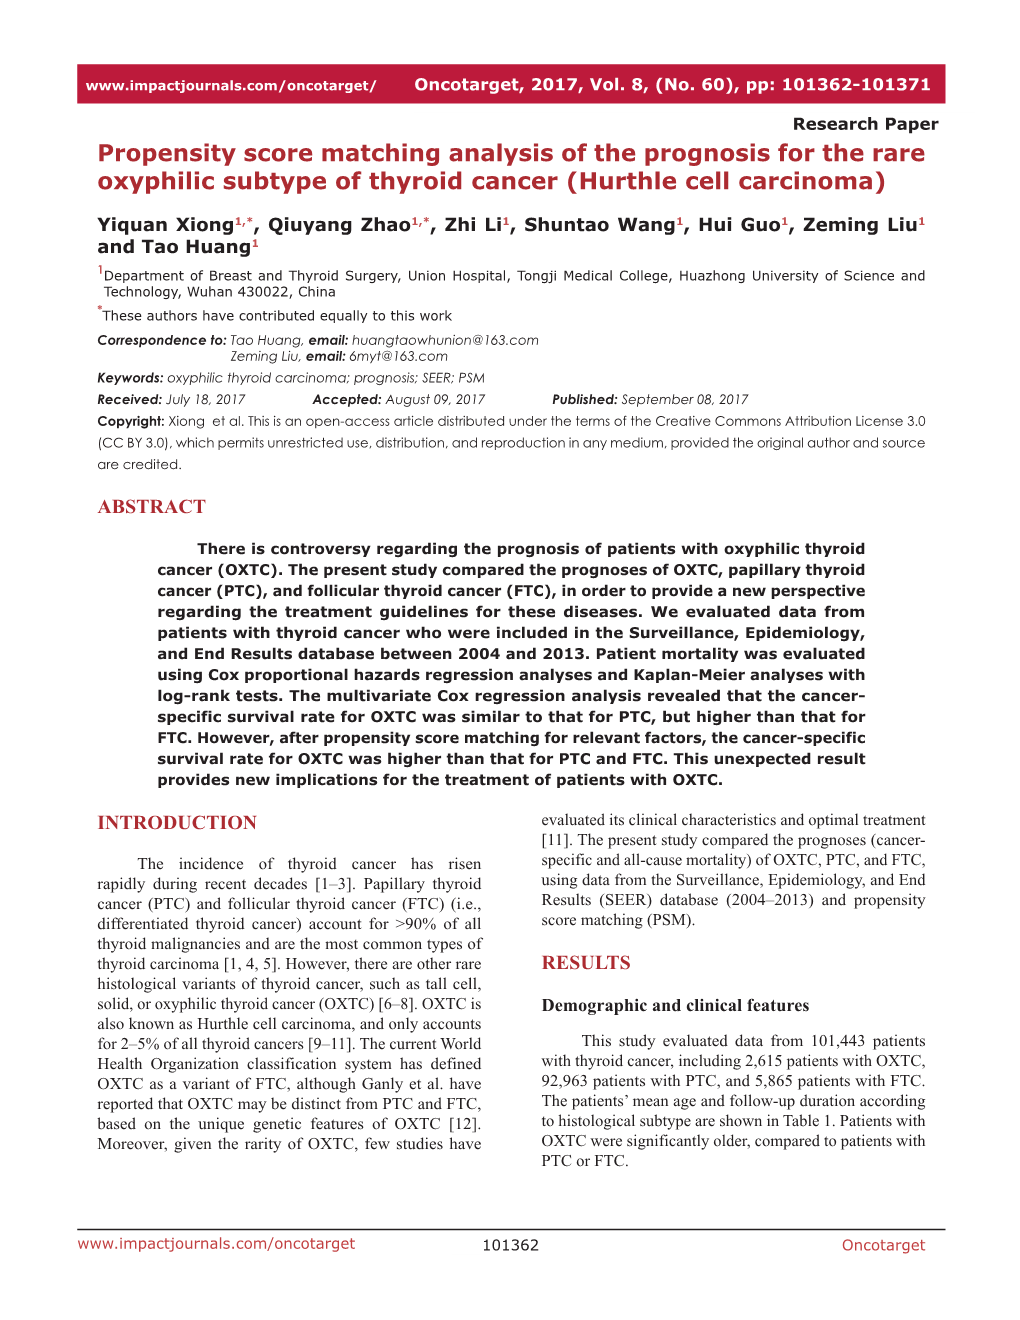 Propensity Score Matching Analysis of the Prognosis for the Rare Oxyphilic Subtype of Thyroid Cancer (Hurthle Cell Carcinoma)